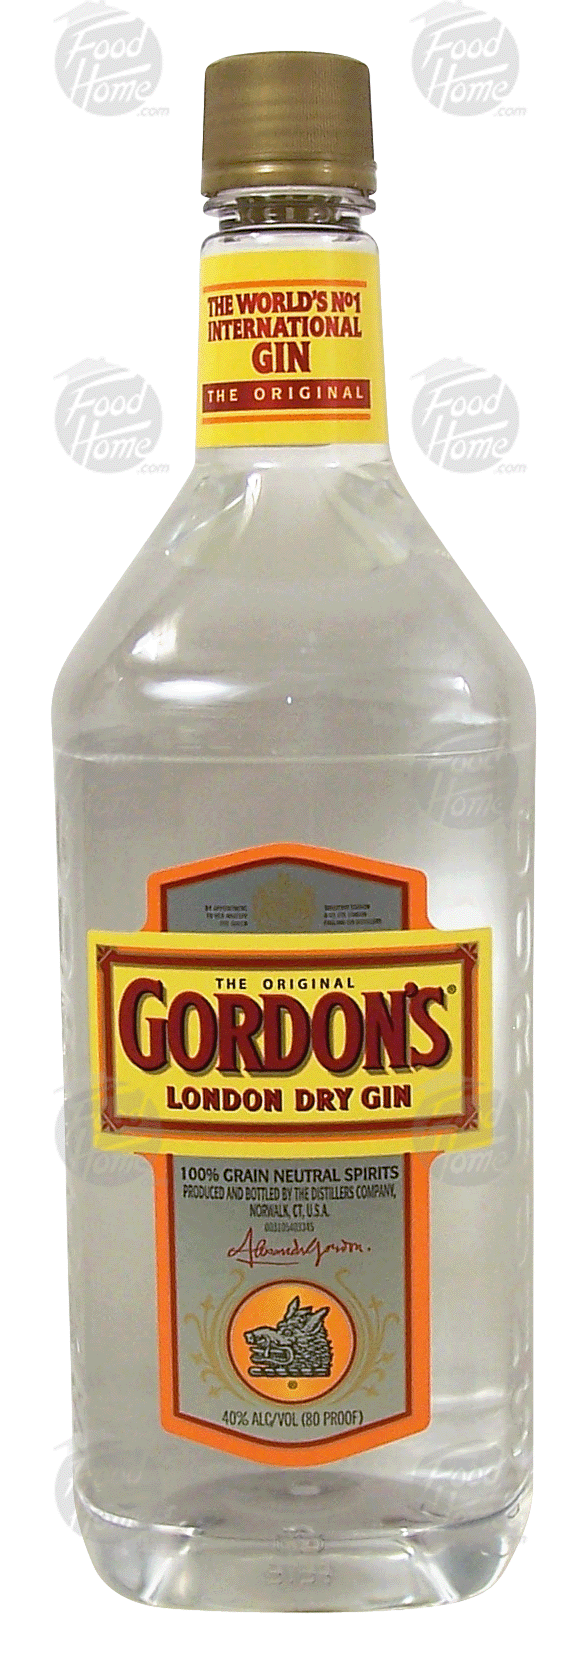 Gordon's The Original gin, london dry, 40% alc. by vol. Full-Size Picture